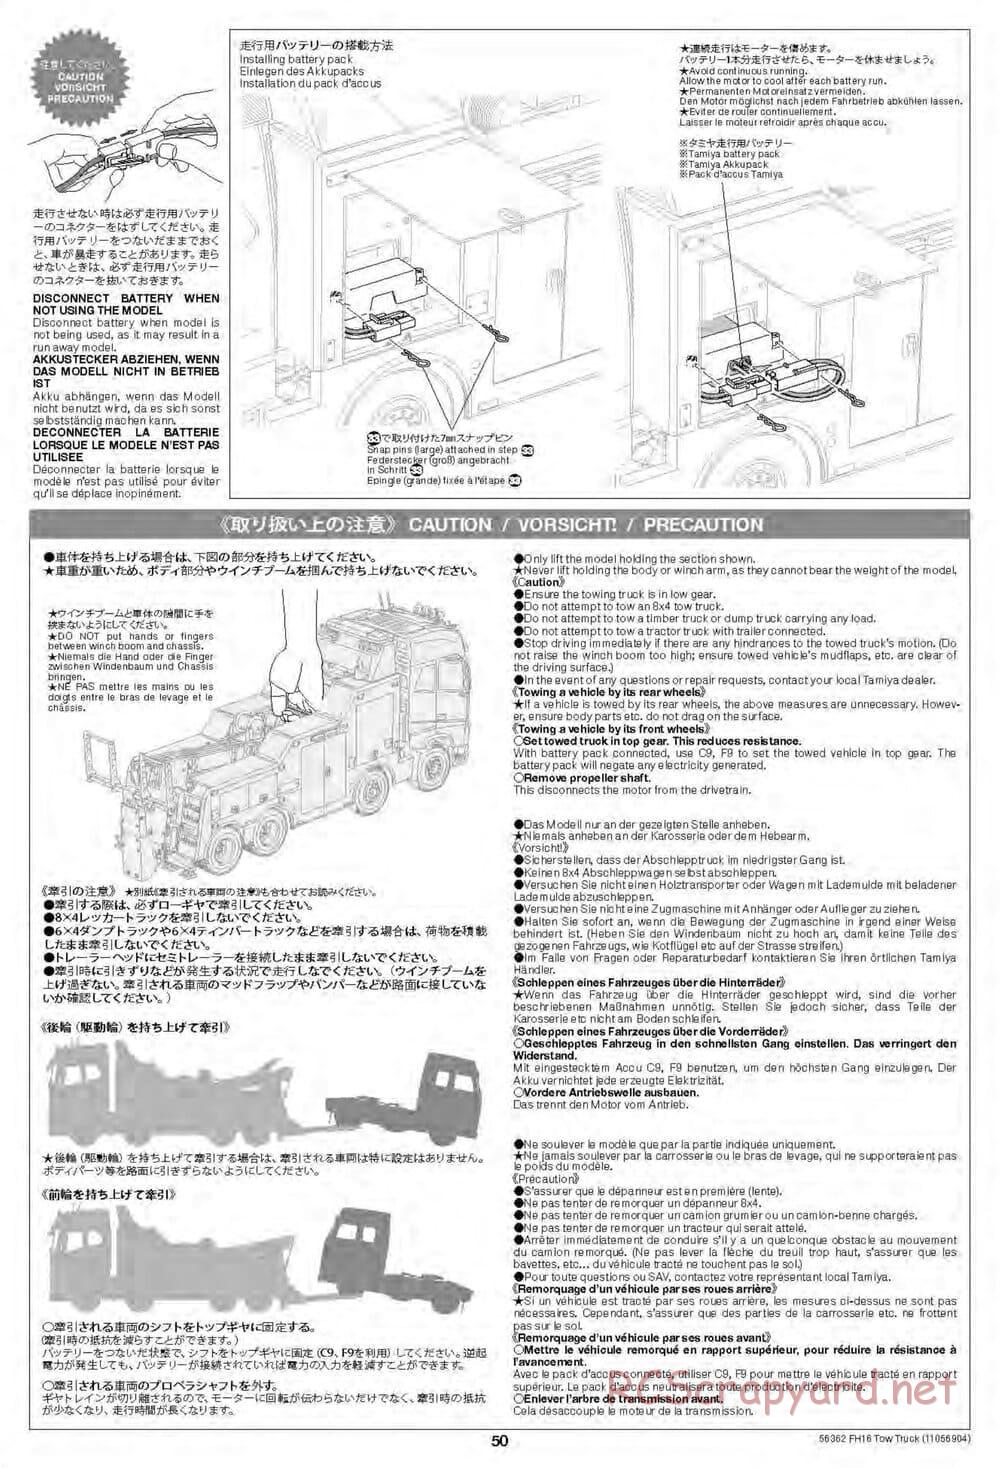 Tamiya - Volvo FH16 Globetrotter 750 8x4 Tow Truck - Manual - Page 50